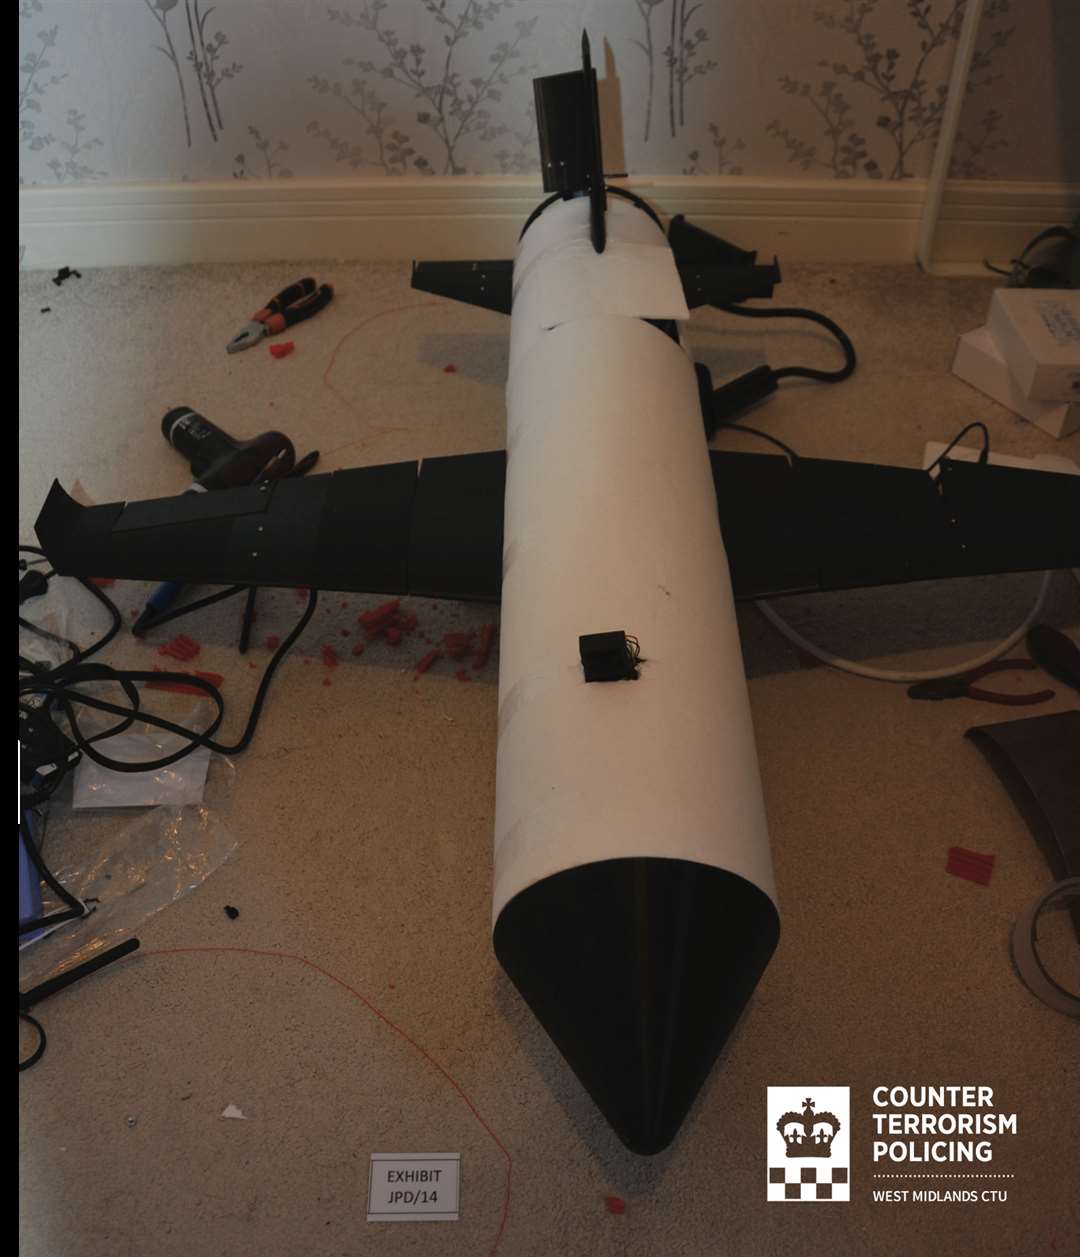 The drone made by Al Bared for use by terrorists (West Midlands CTU/PA)